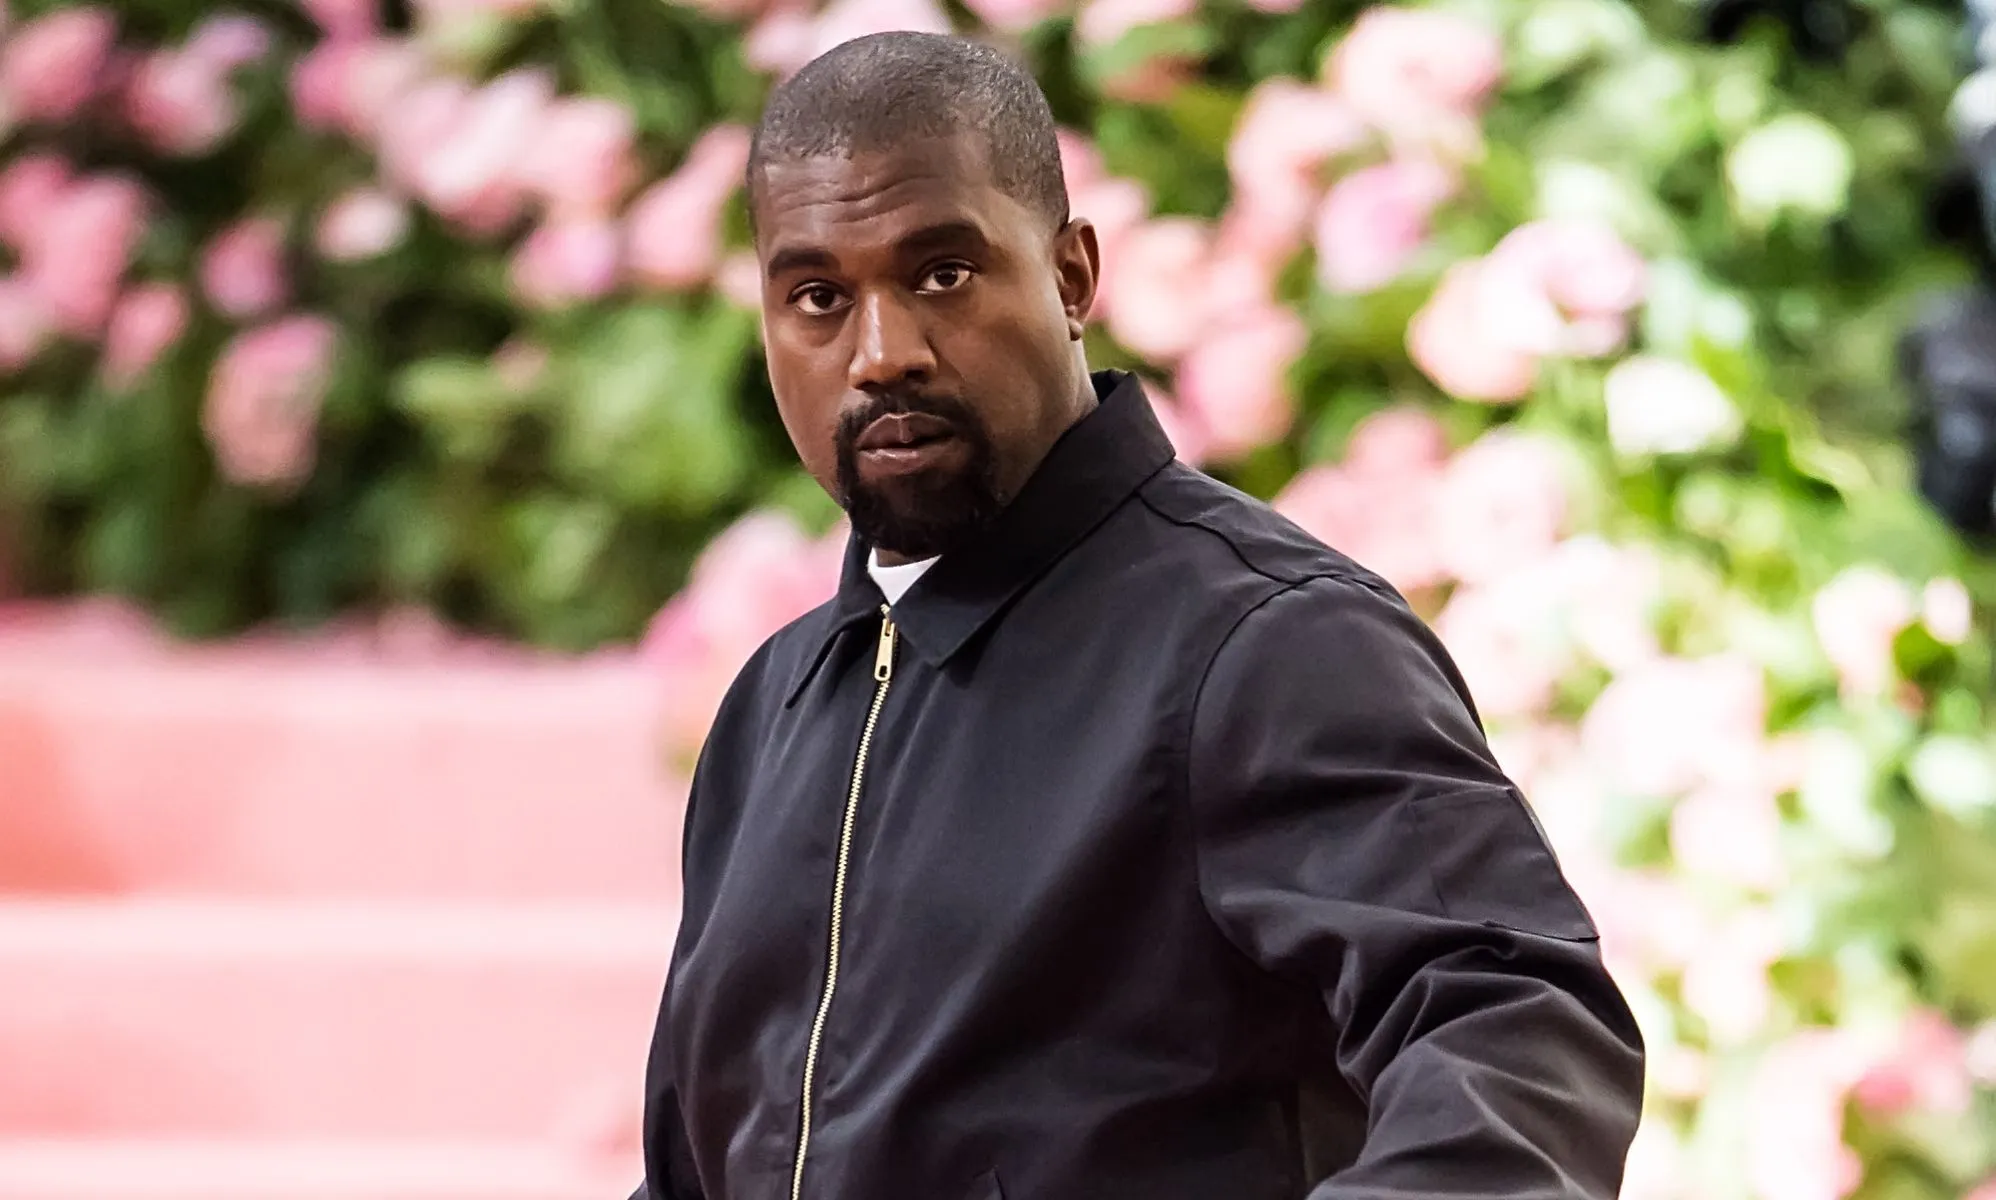 Ye said he is ‘going for the gays’ and called Hitler an ‘innovator’, lawsuit alleges